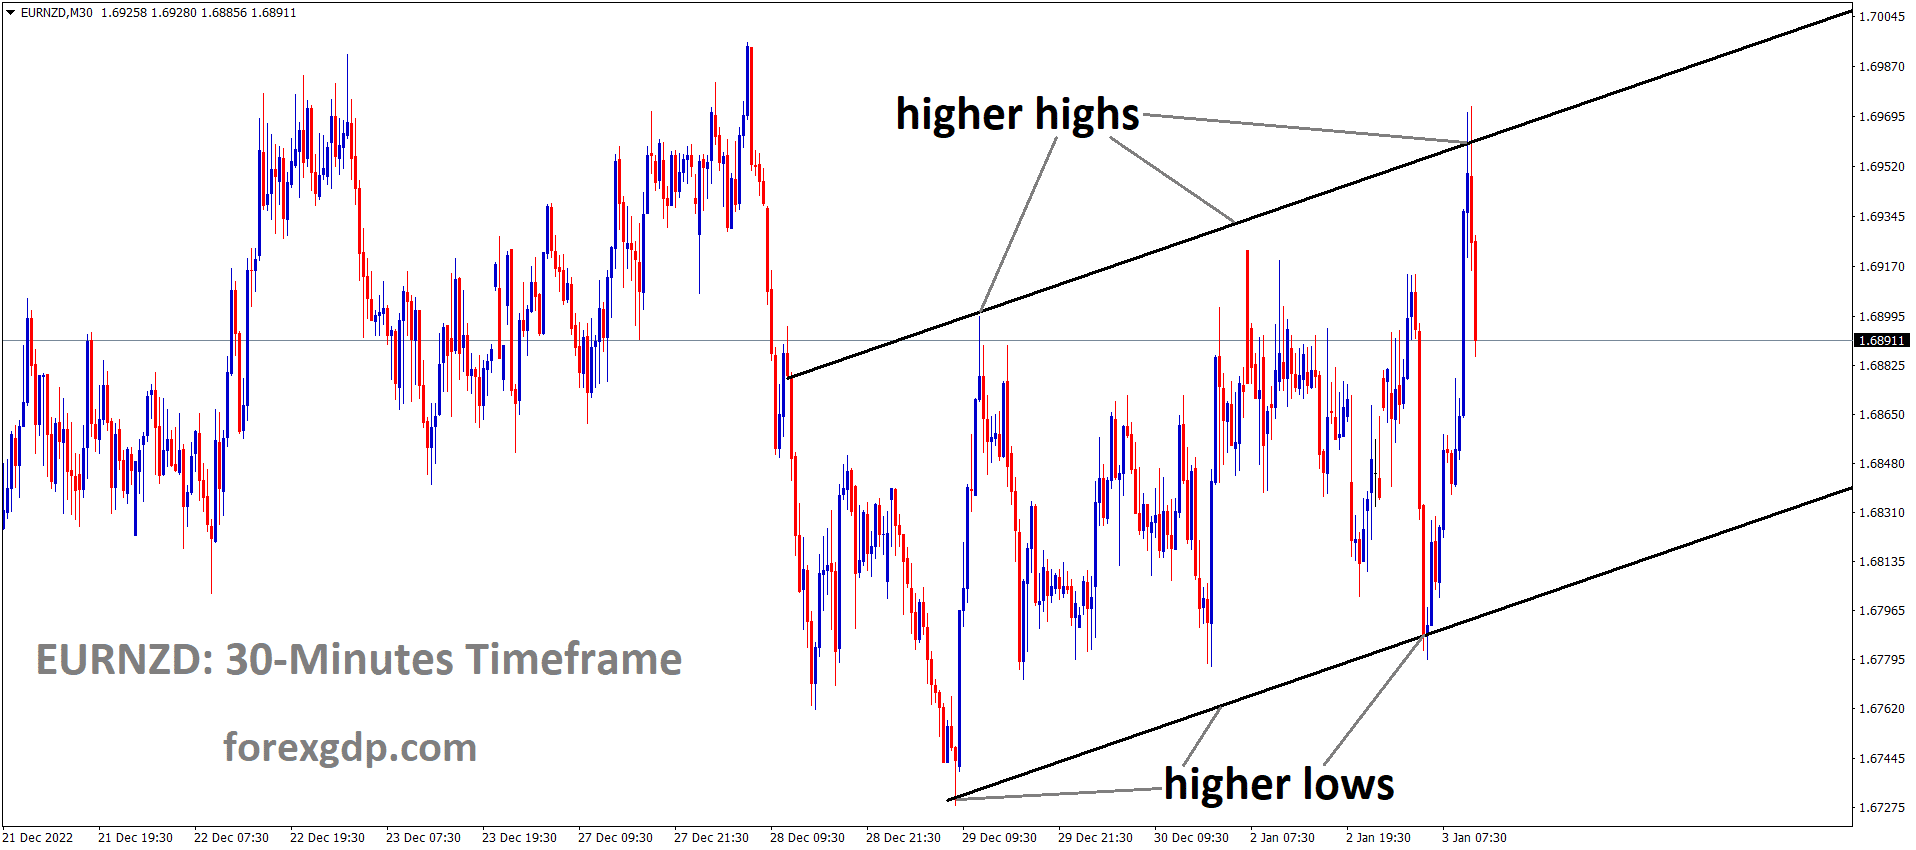 EURNZD is moving in an Ascending channel and the market has fallen from the higher high area of the channel